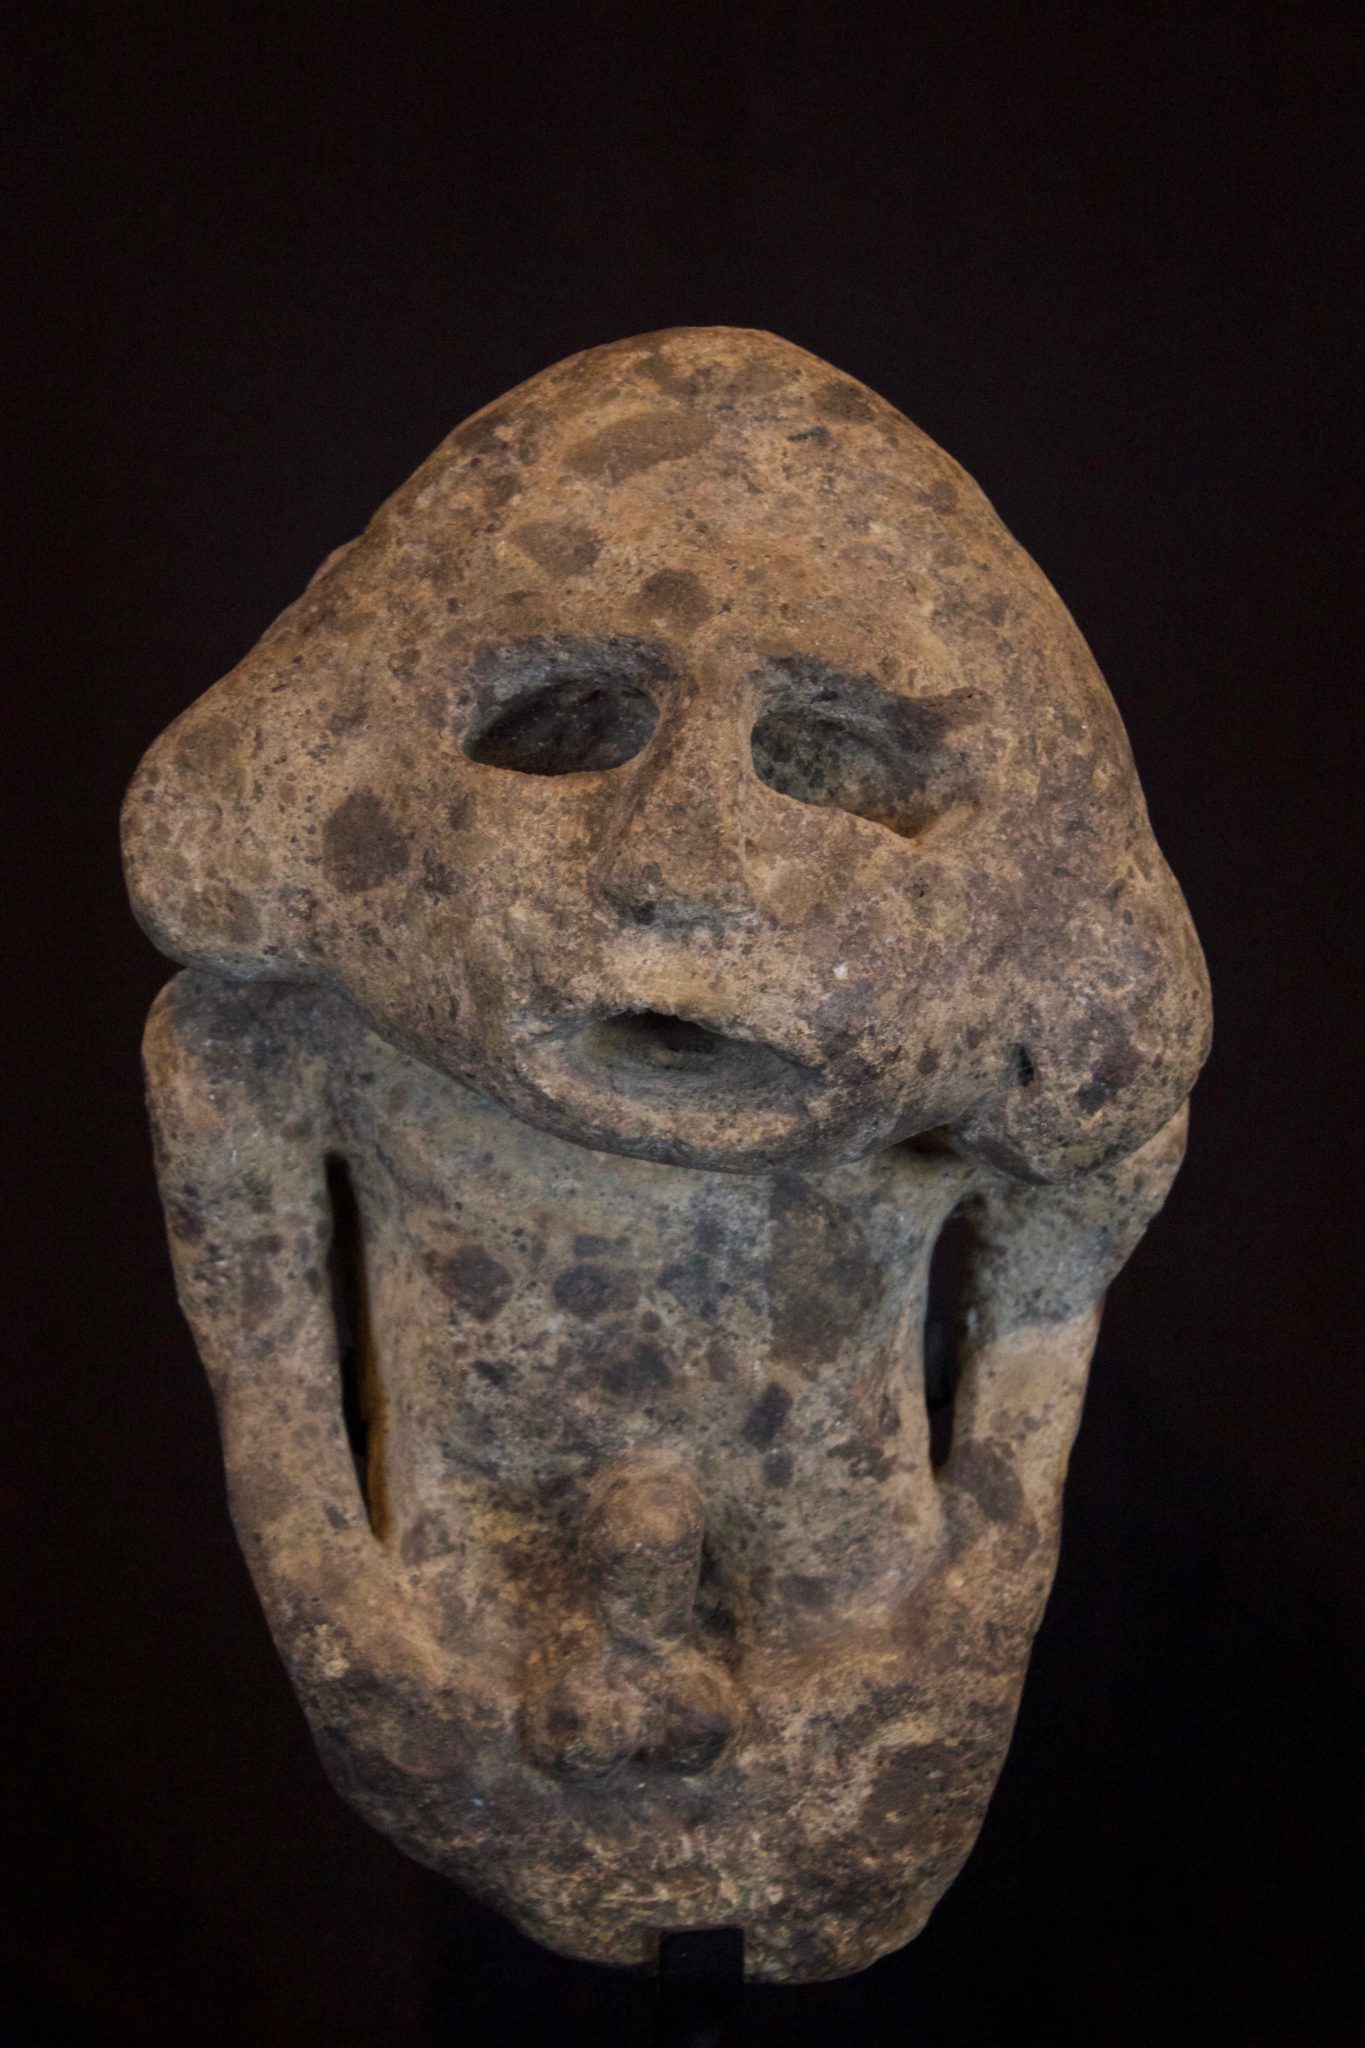 Effigy Figure, Flores Island, Lesser Sunda Islands, Indonesia, Late 19th to early 20th c, Aggregate Stone, Used by shaman for healing and divination, 11” x 8” x 6”, sold